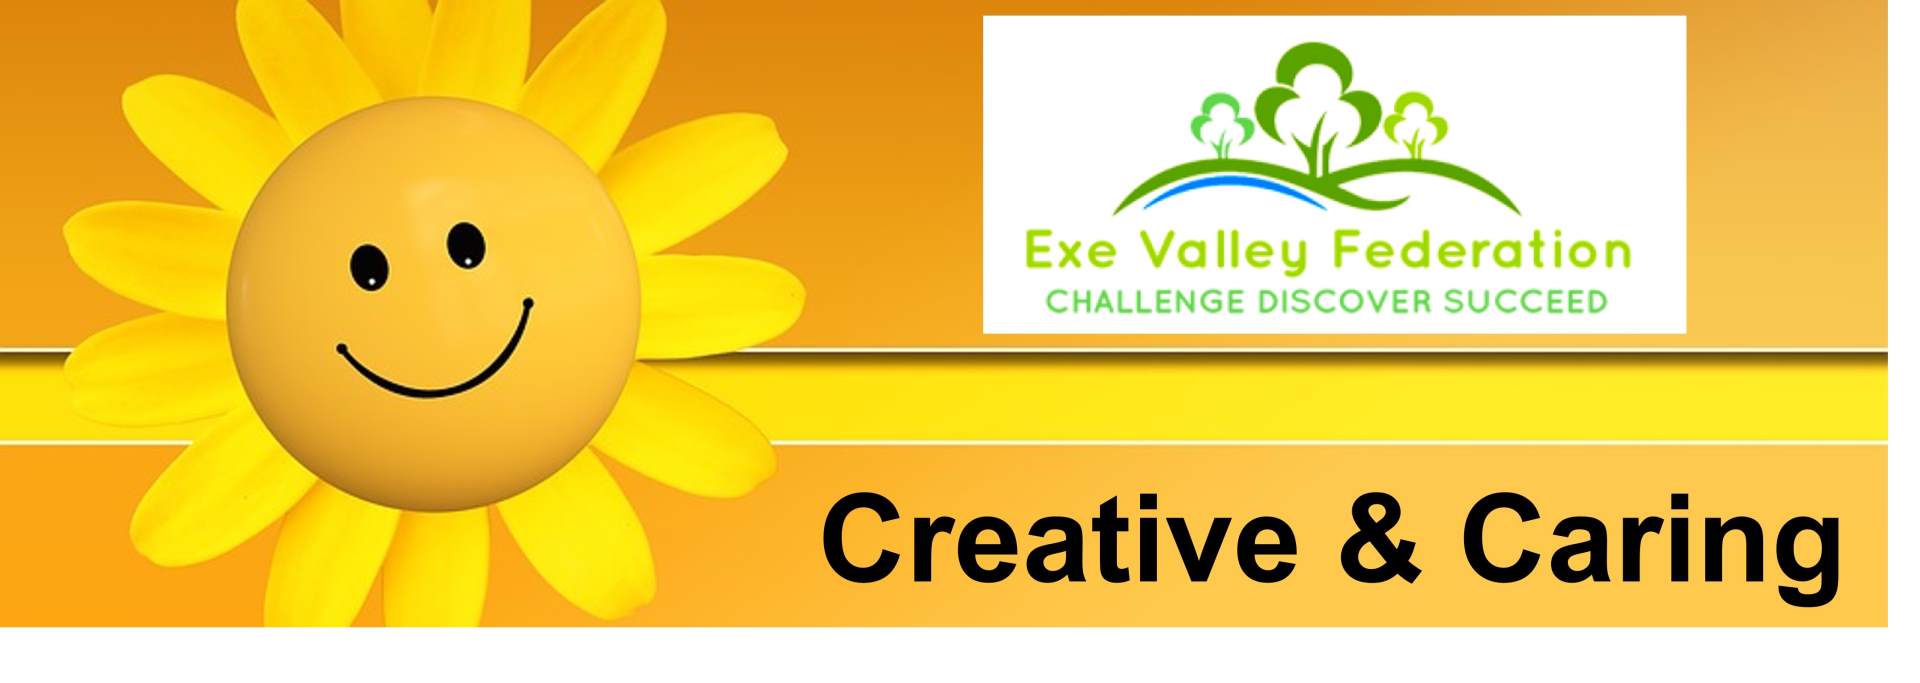 Exe Valley Federation Caring